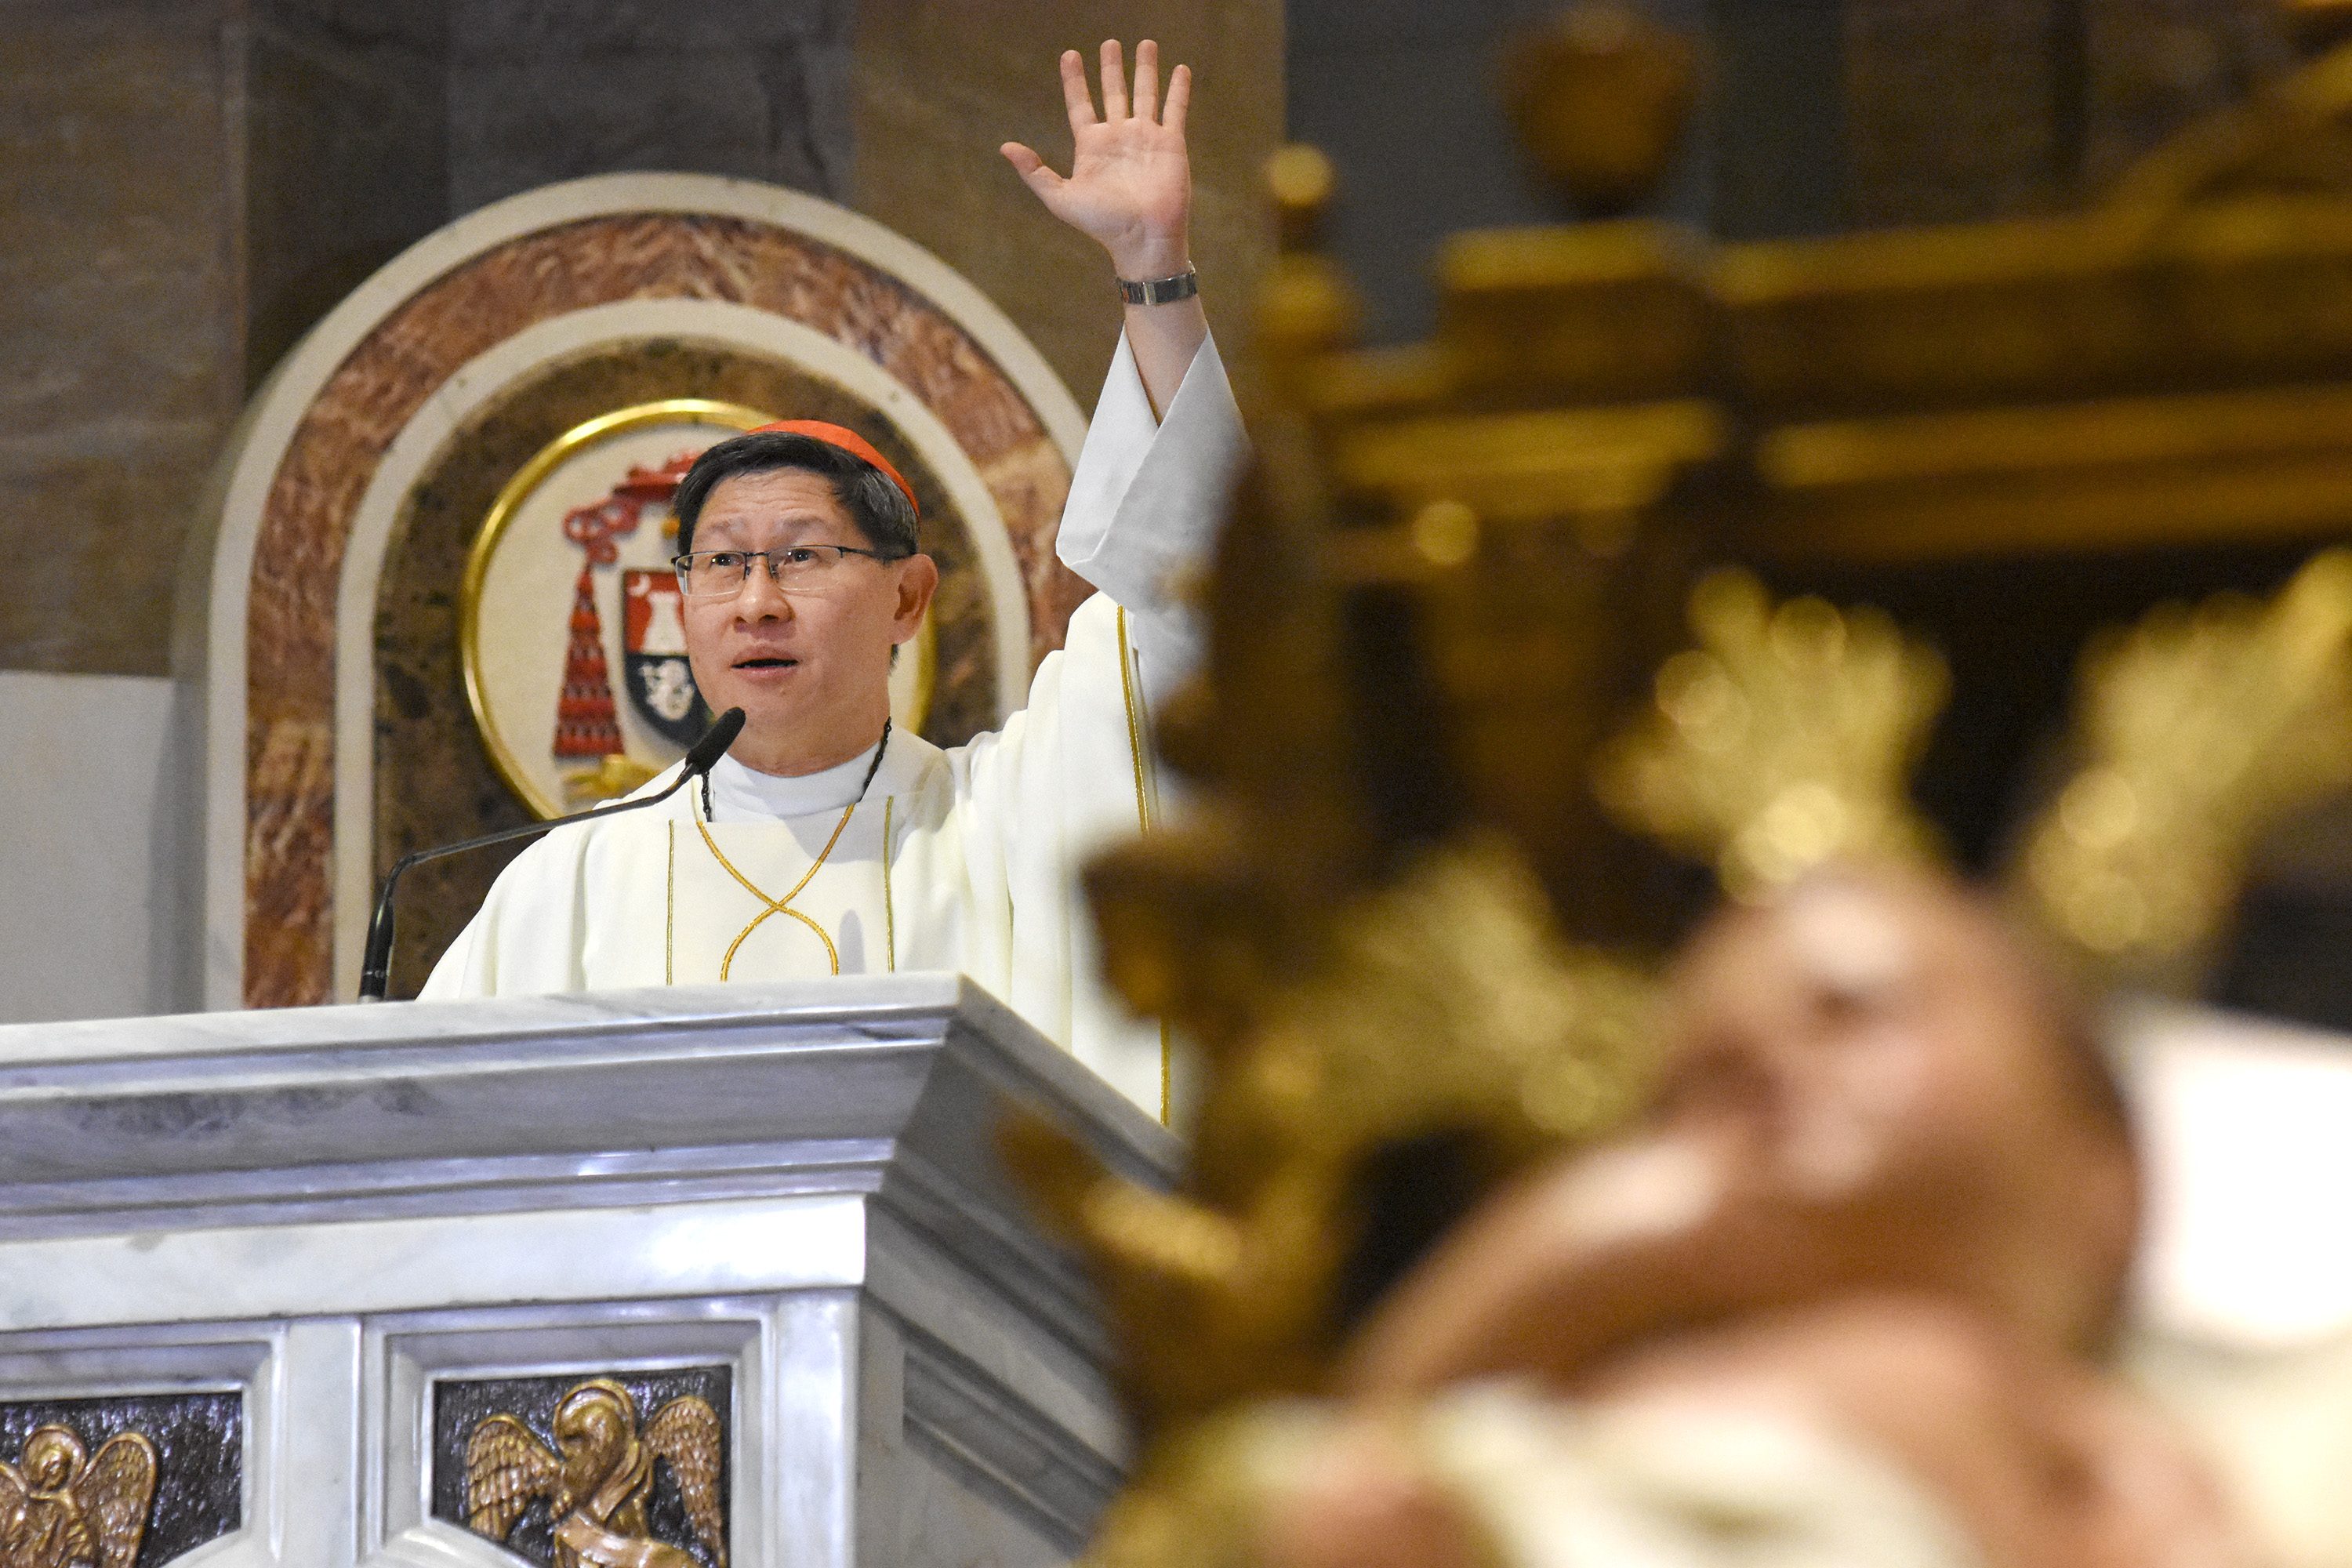 REMEMBER THE SUFFERING. Manila Archbishop Luis Antonio Cardinal Tagle urges Filipinos to remember the poor and suffering as he leads the Christmas Eve Mass at the Manila Cathedral on December 24, 2017. Photo by Angie de Silva/Rappler 